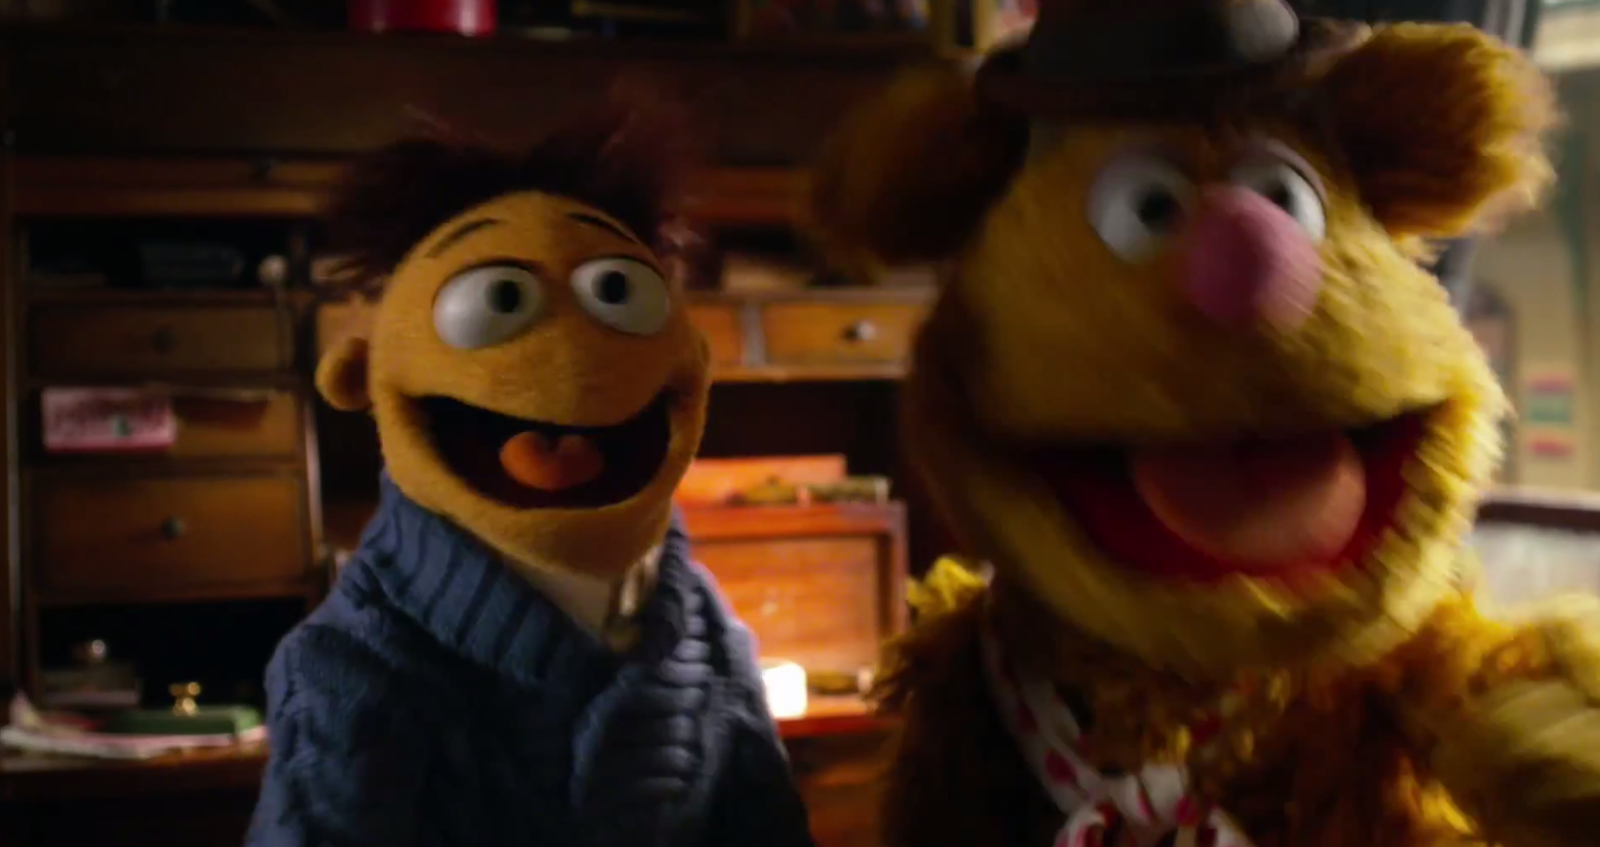 I really really love that Fozzie and Walter are 